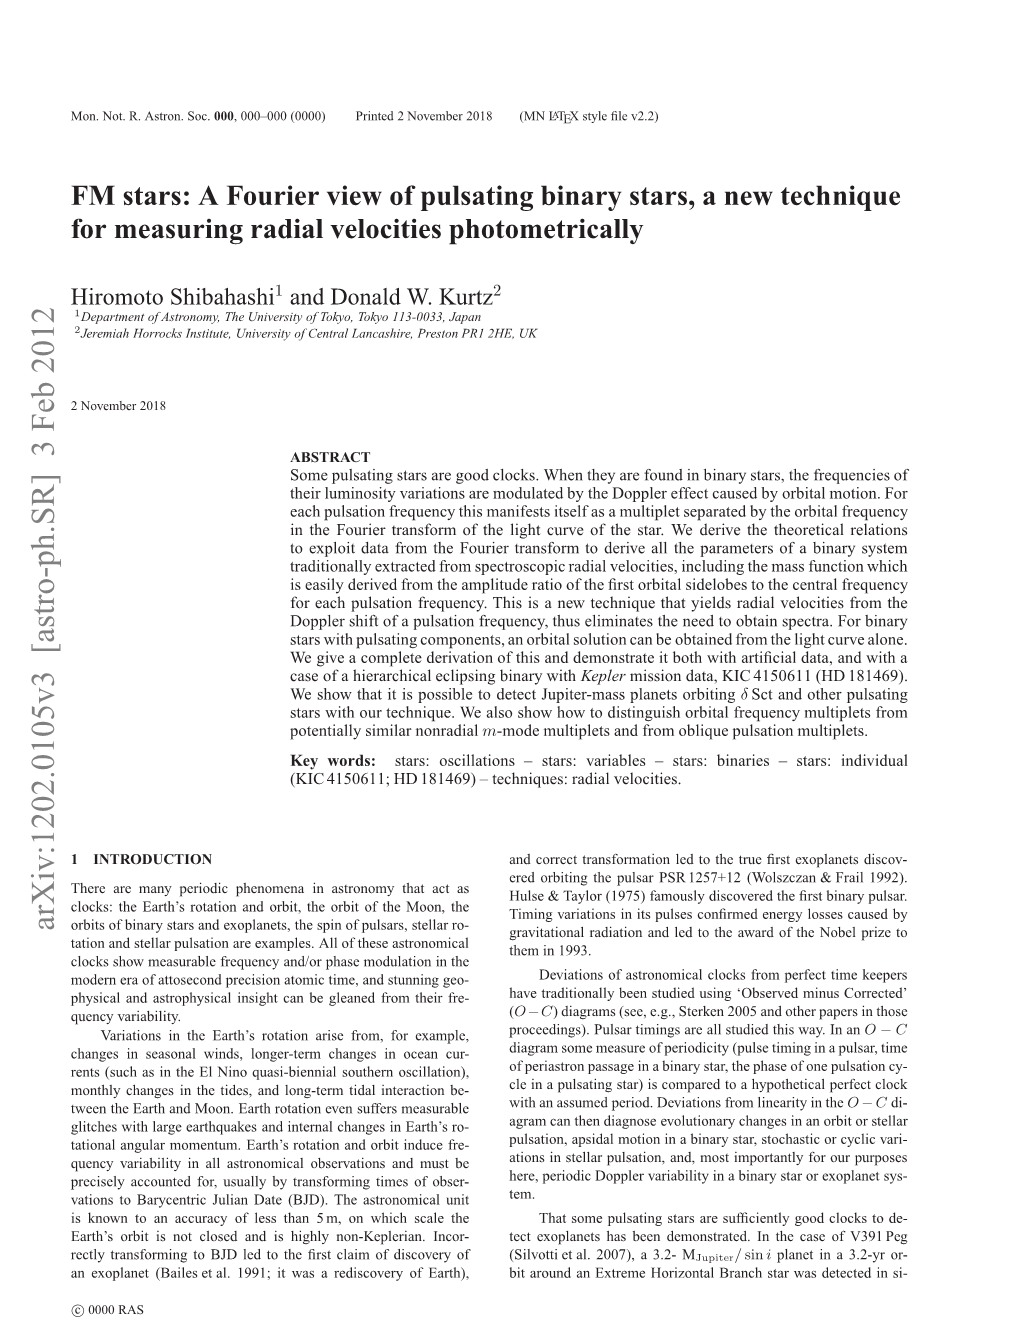 A Fourier View of Pulsating Binary Stars, a New Technique For